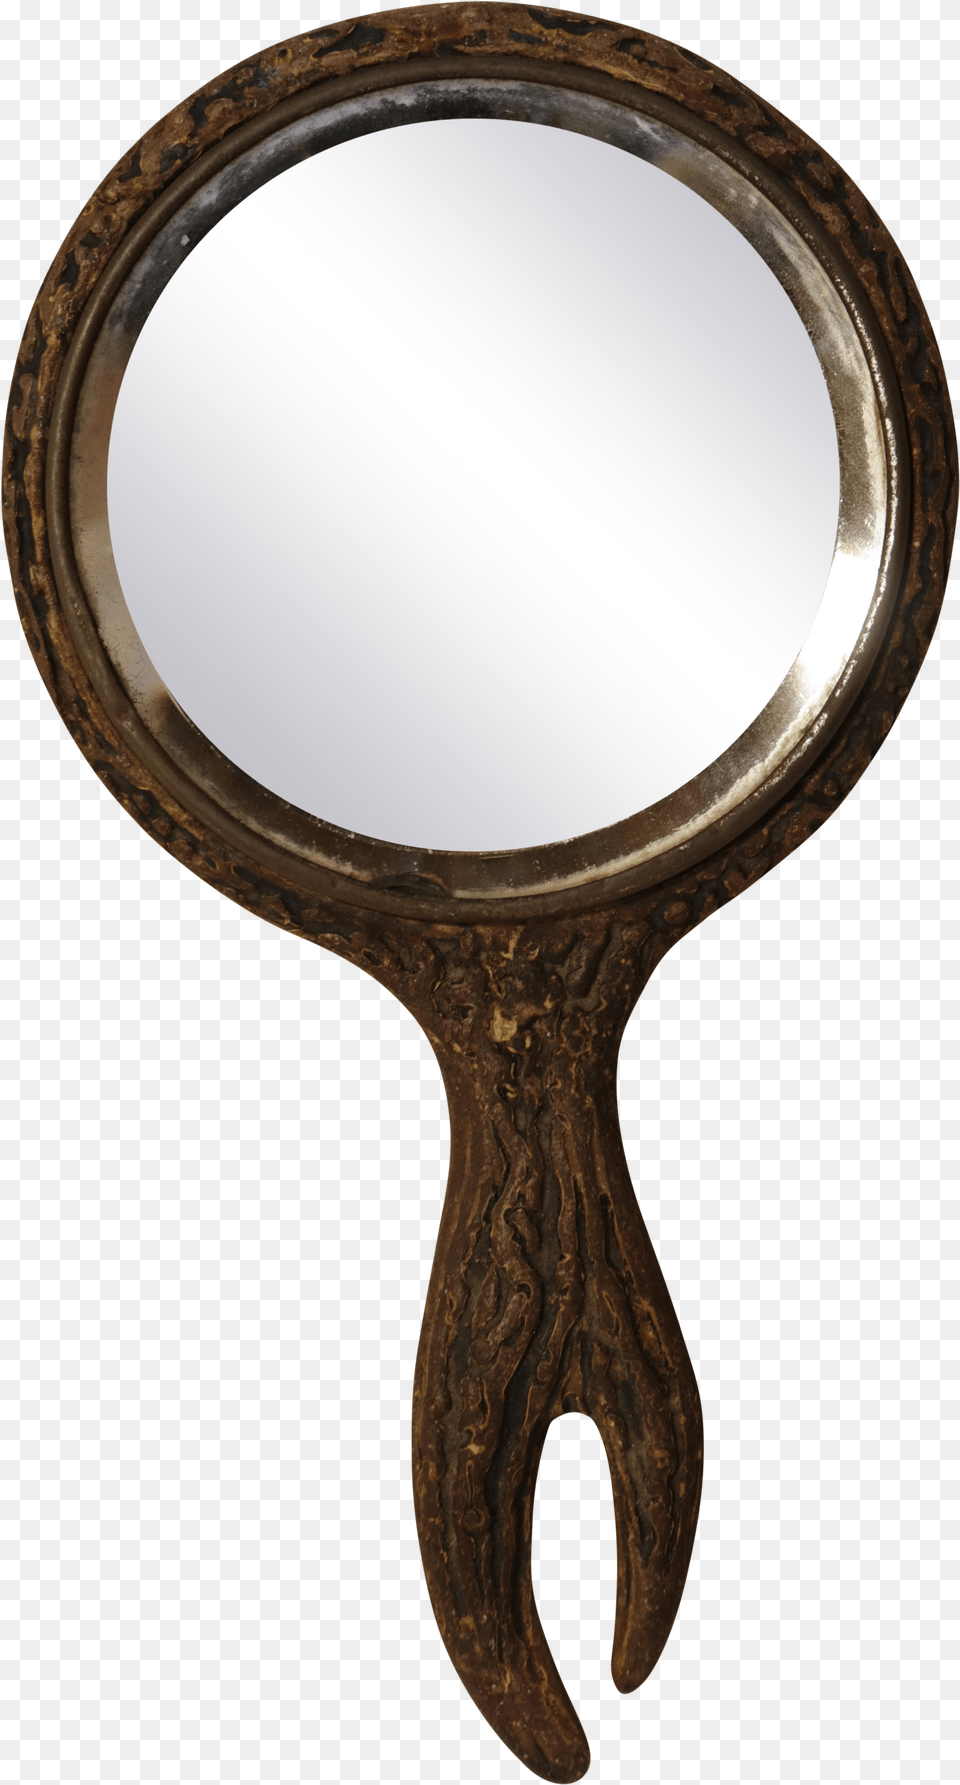 Old Fashioned Mirrors Designs Old Hand Held Mirror Free Transparent Png